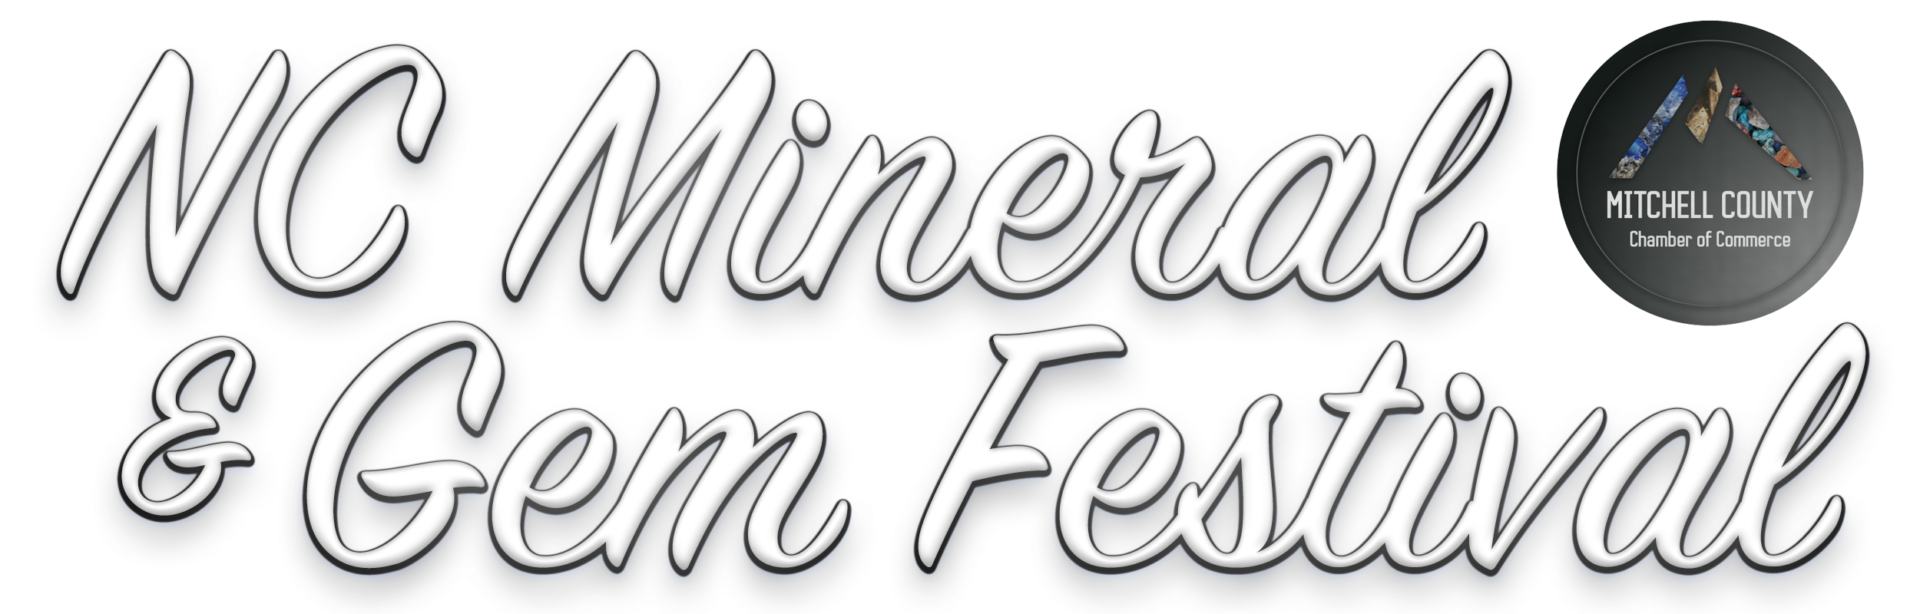 NC Mineral and Gem Festival with Mitchell County Chamber of Commerce Logo